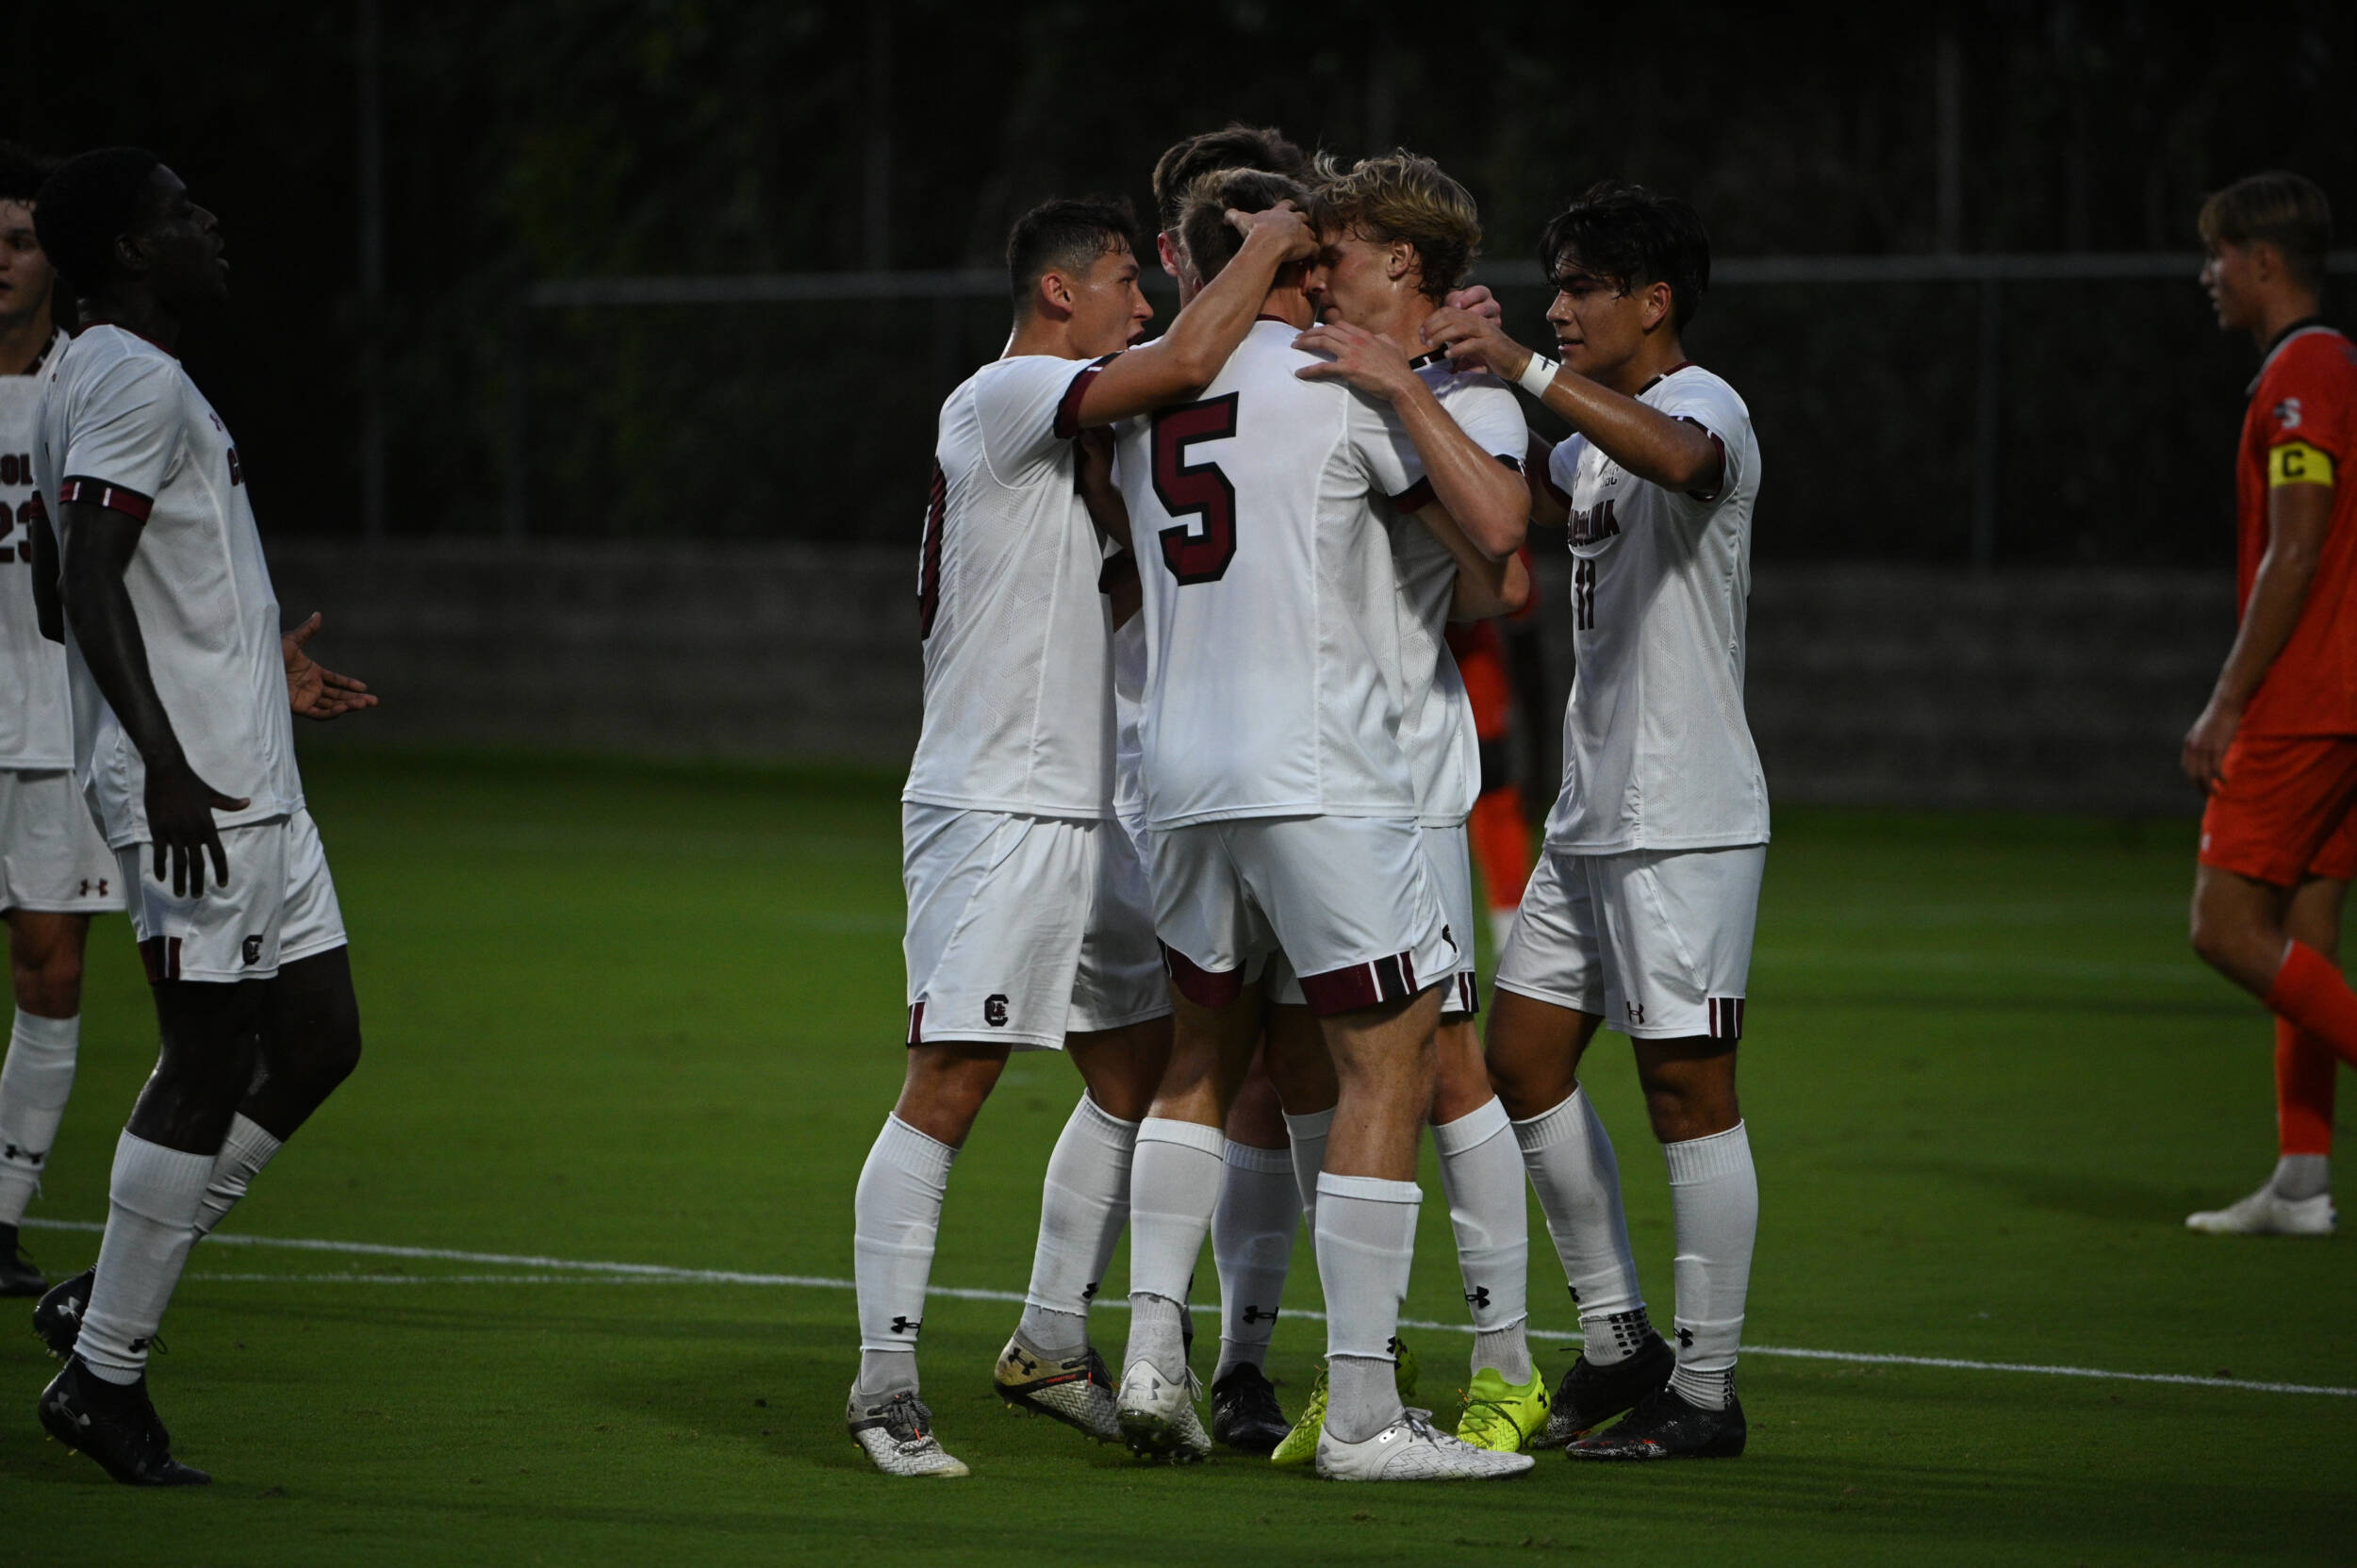 Bruletti's First Career Goal Gives Gamecocks Victory Over Camels